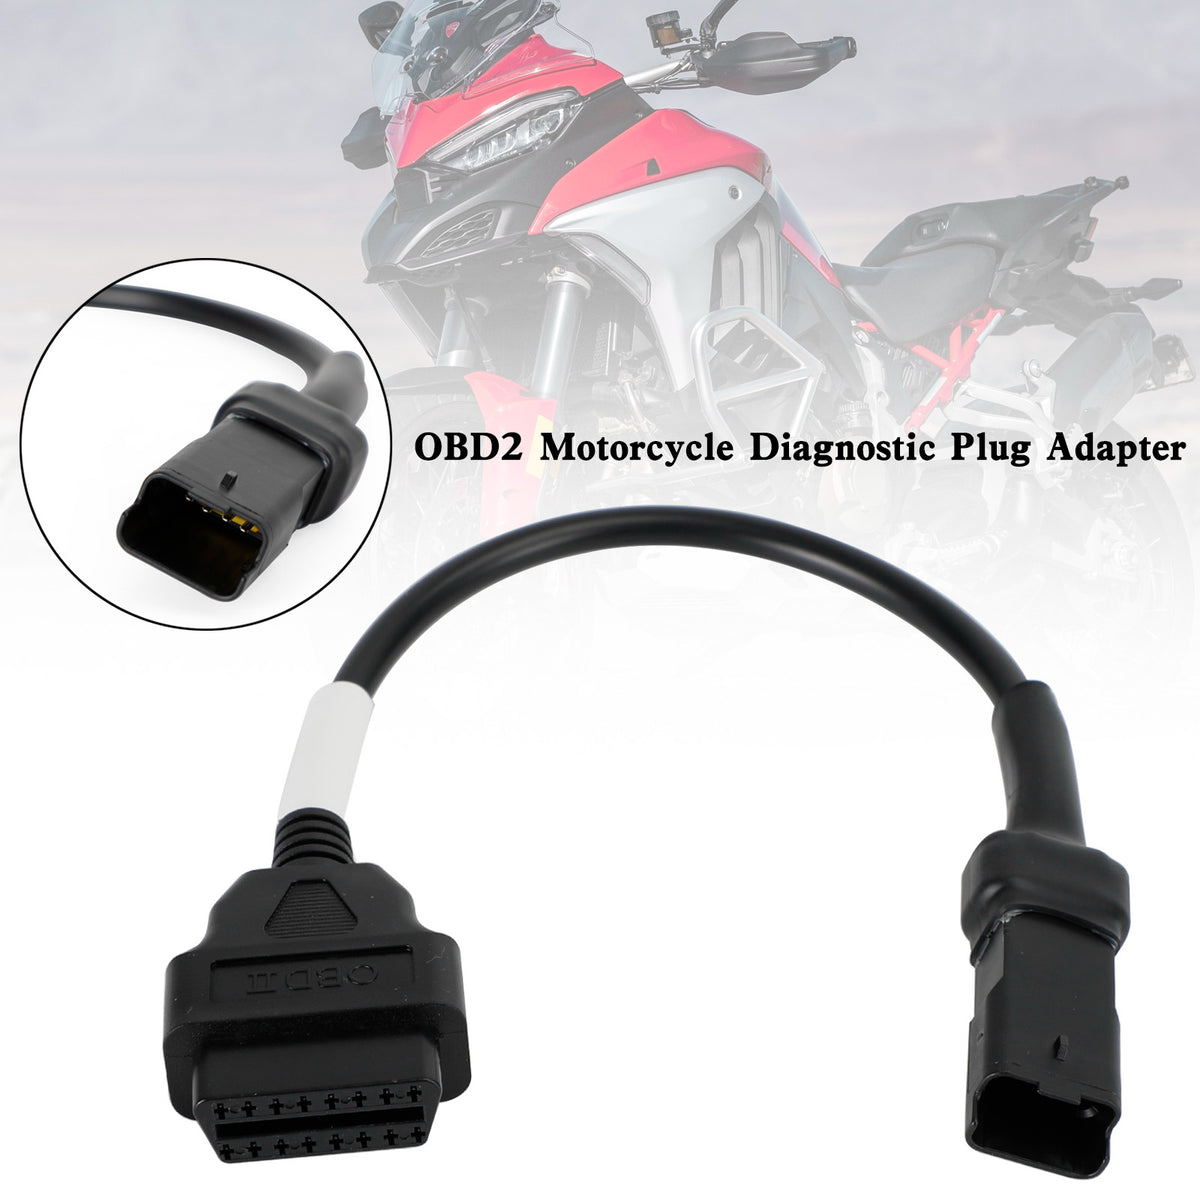 4 pin to OBD2 Diagnostic adapter connector harness For DUCATI Panigale Generic